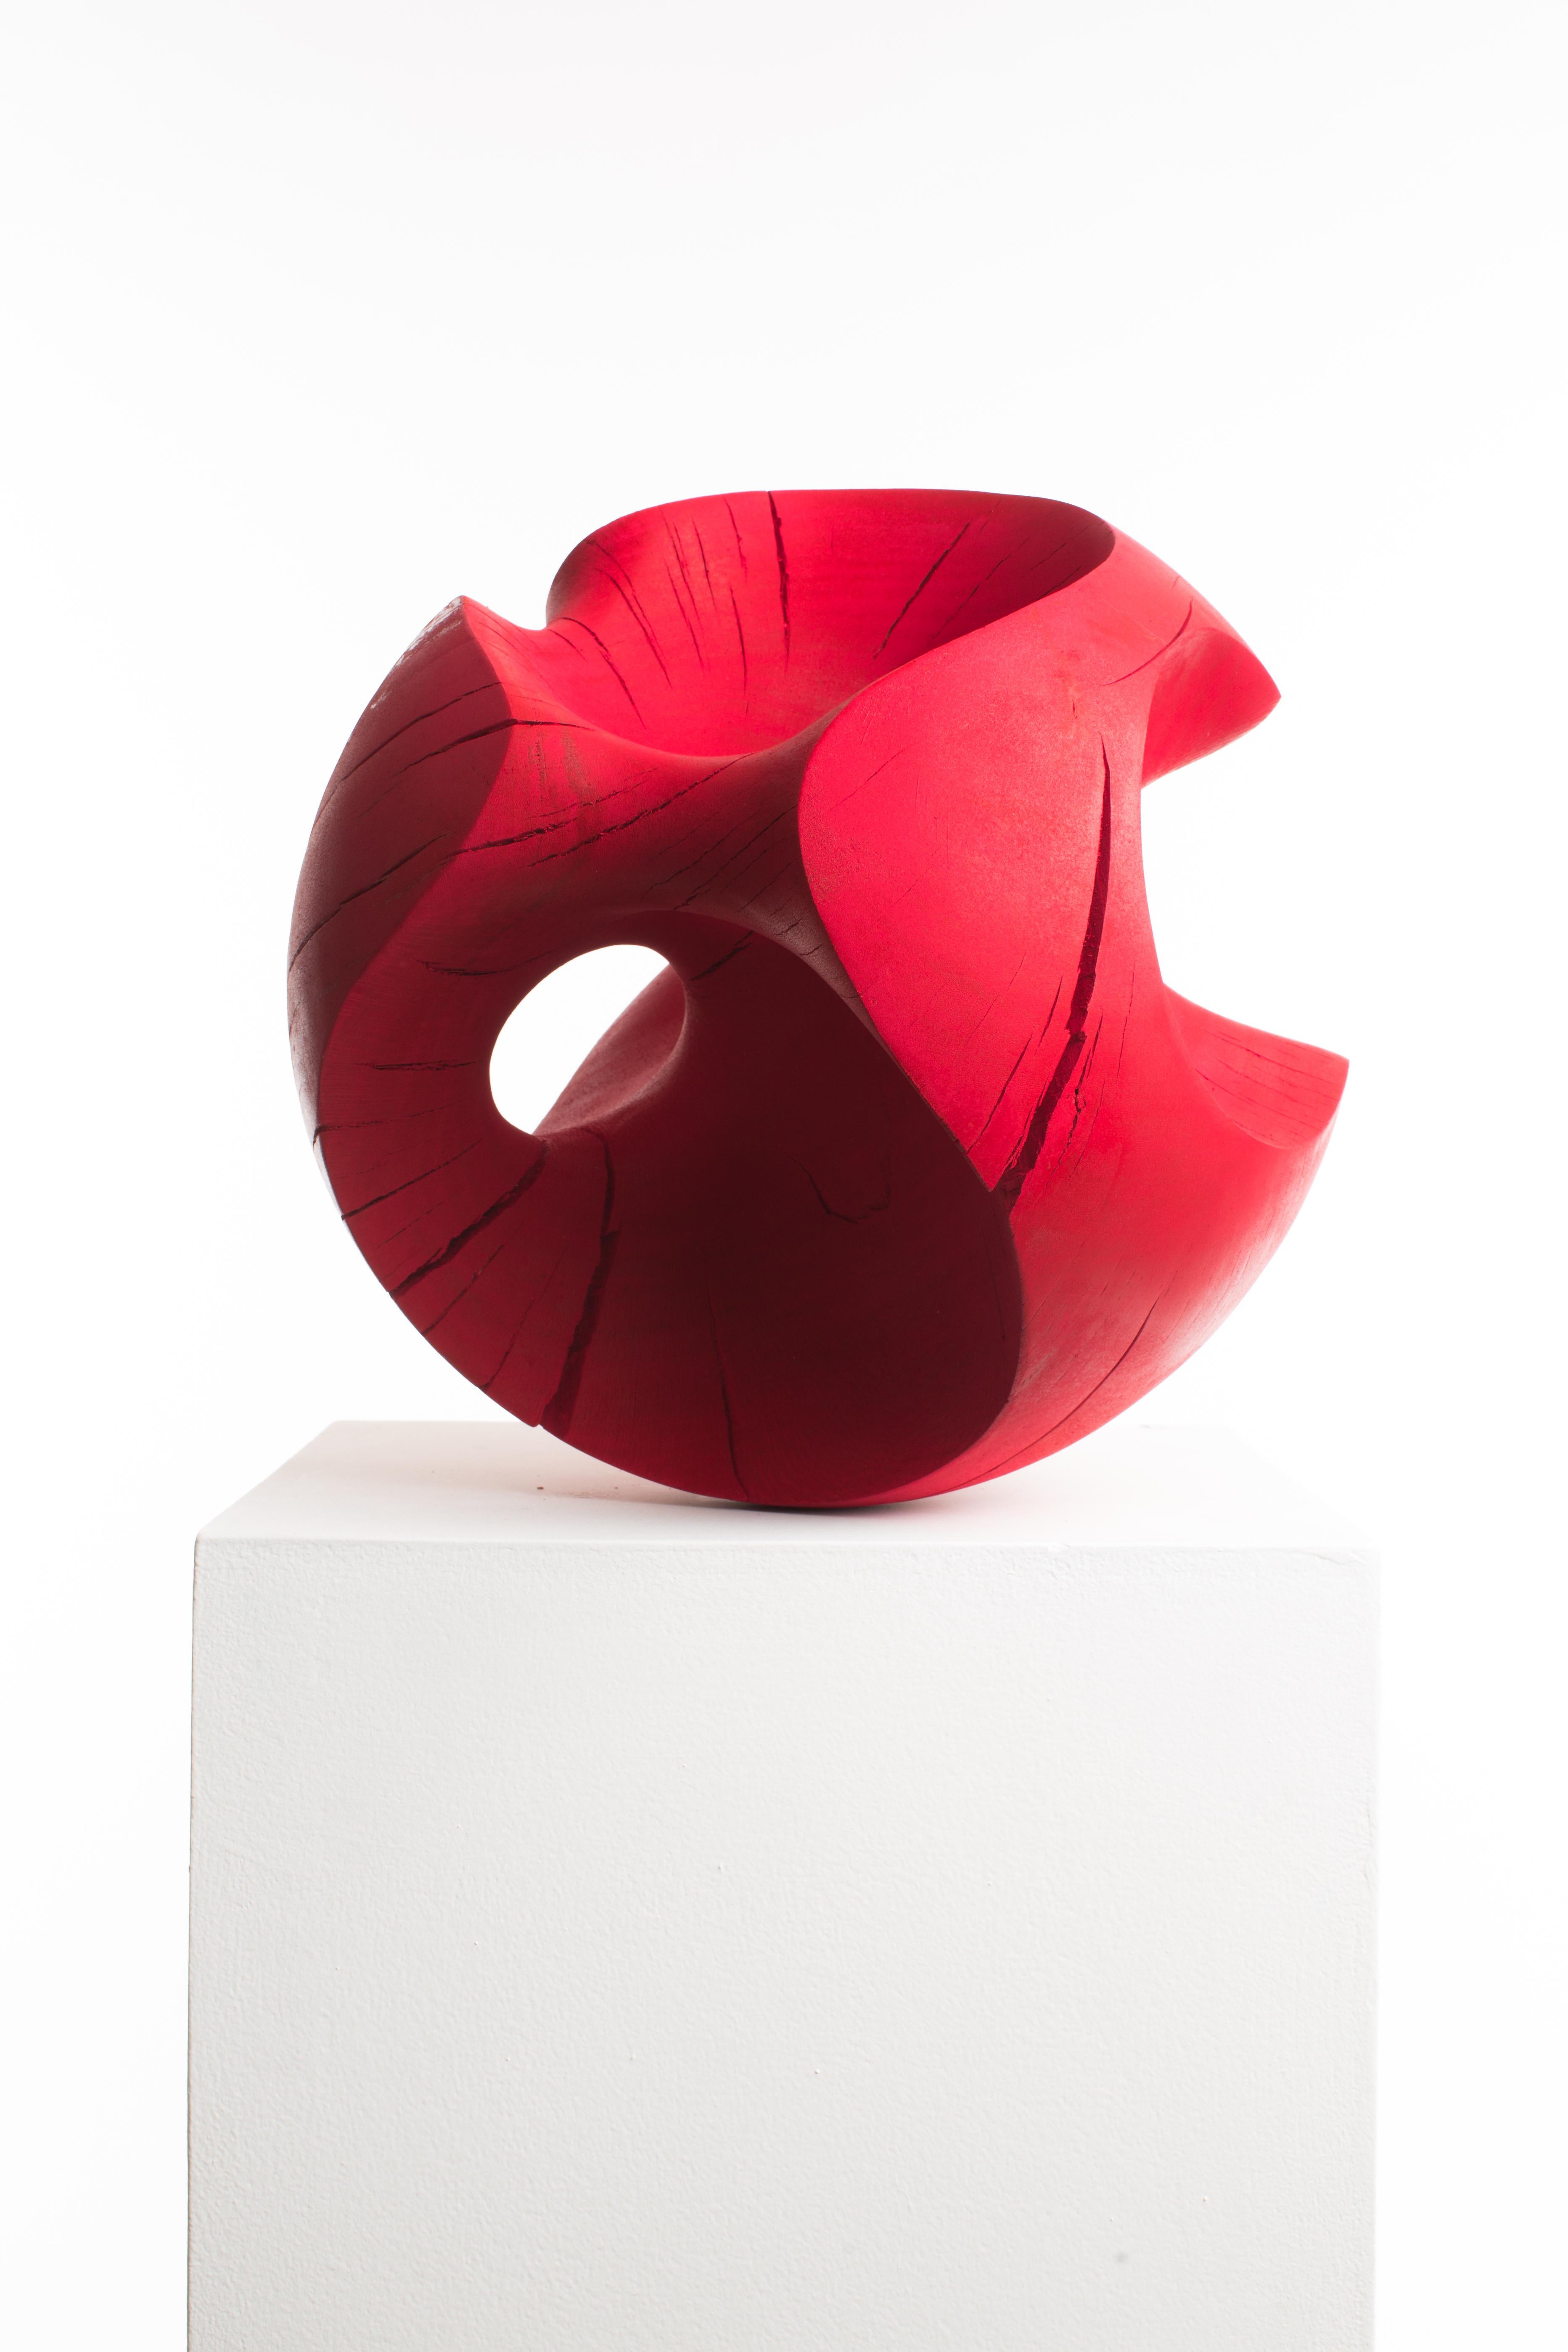 Wooden Sphere 007 
1/1
Silky Oak / Red 
33cm Ø
8.30Kg 
2020

Crystalized Sculptures is an abstracted exploration of marks left on the physical mind by experiences of emotion and feelings. In Driaan Claassens' work, where whisps portray the